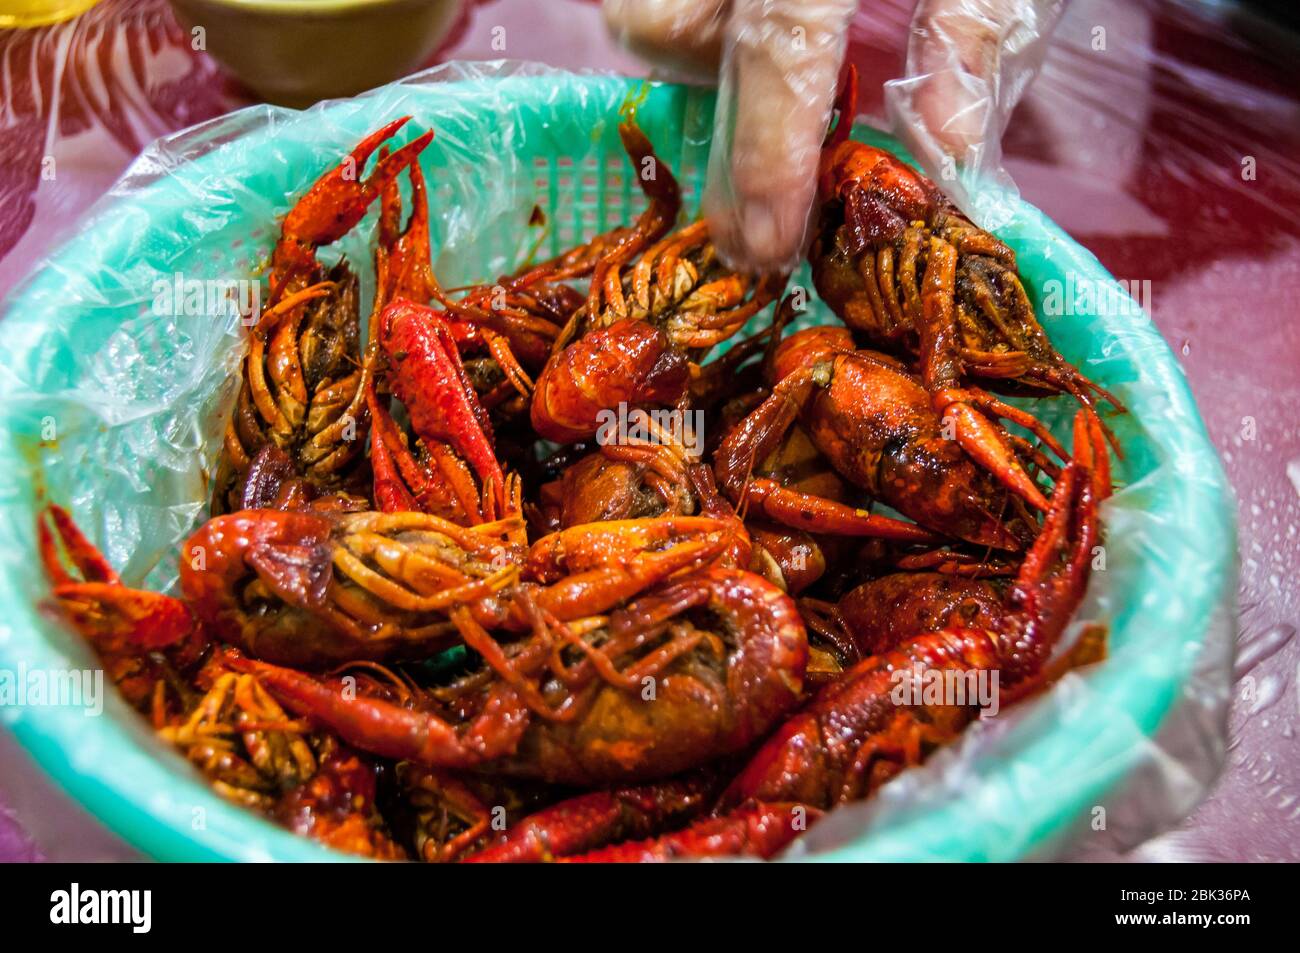 Eating mala flavoured crayfish (yabbies) in a restaruant on Shanghai's Shouning Road. Stock Photo